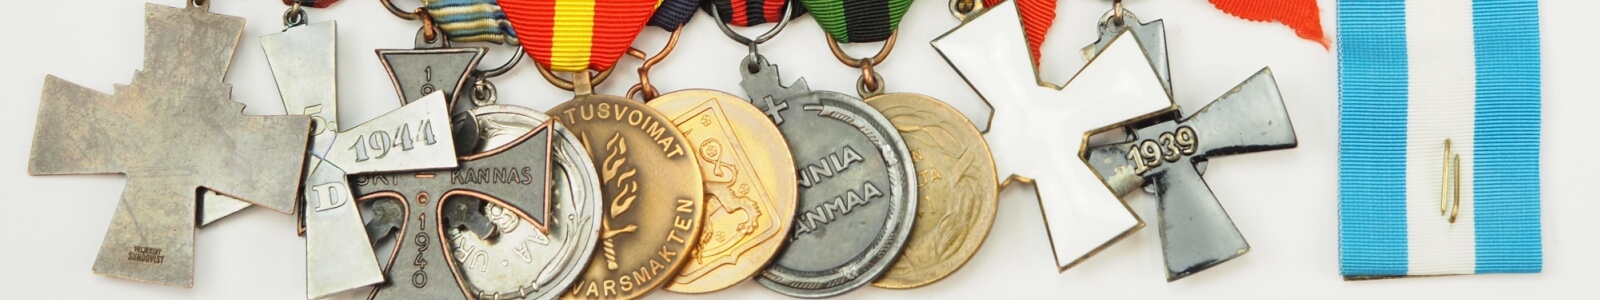 Auction 23: Medals and badges of honor